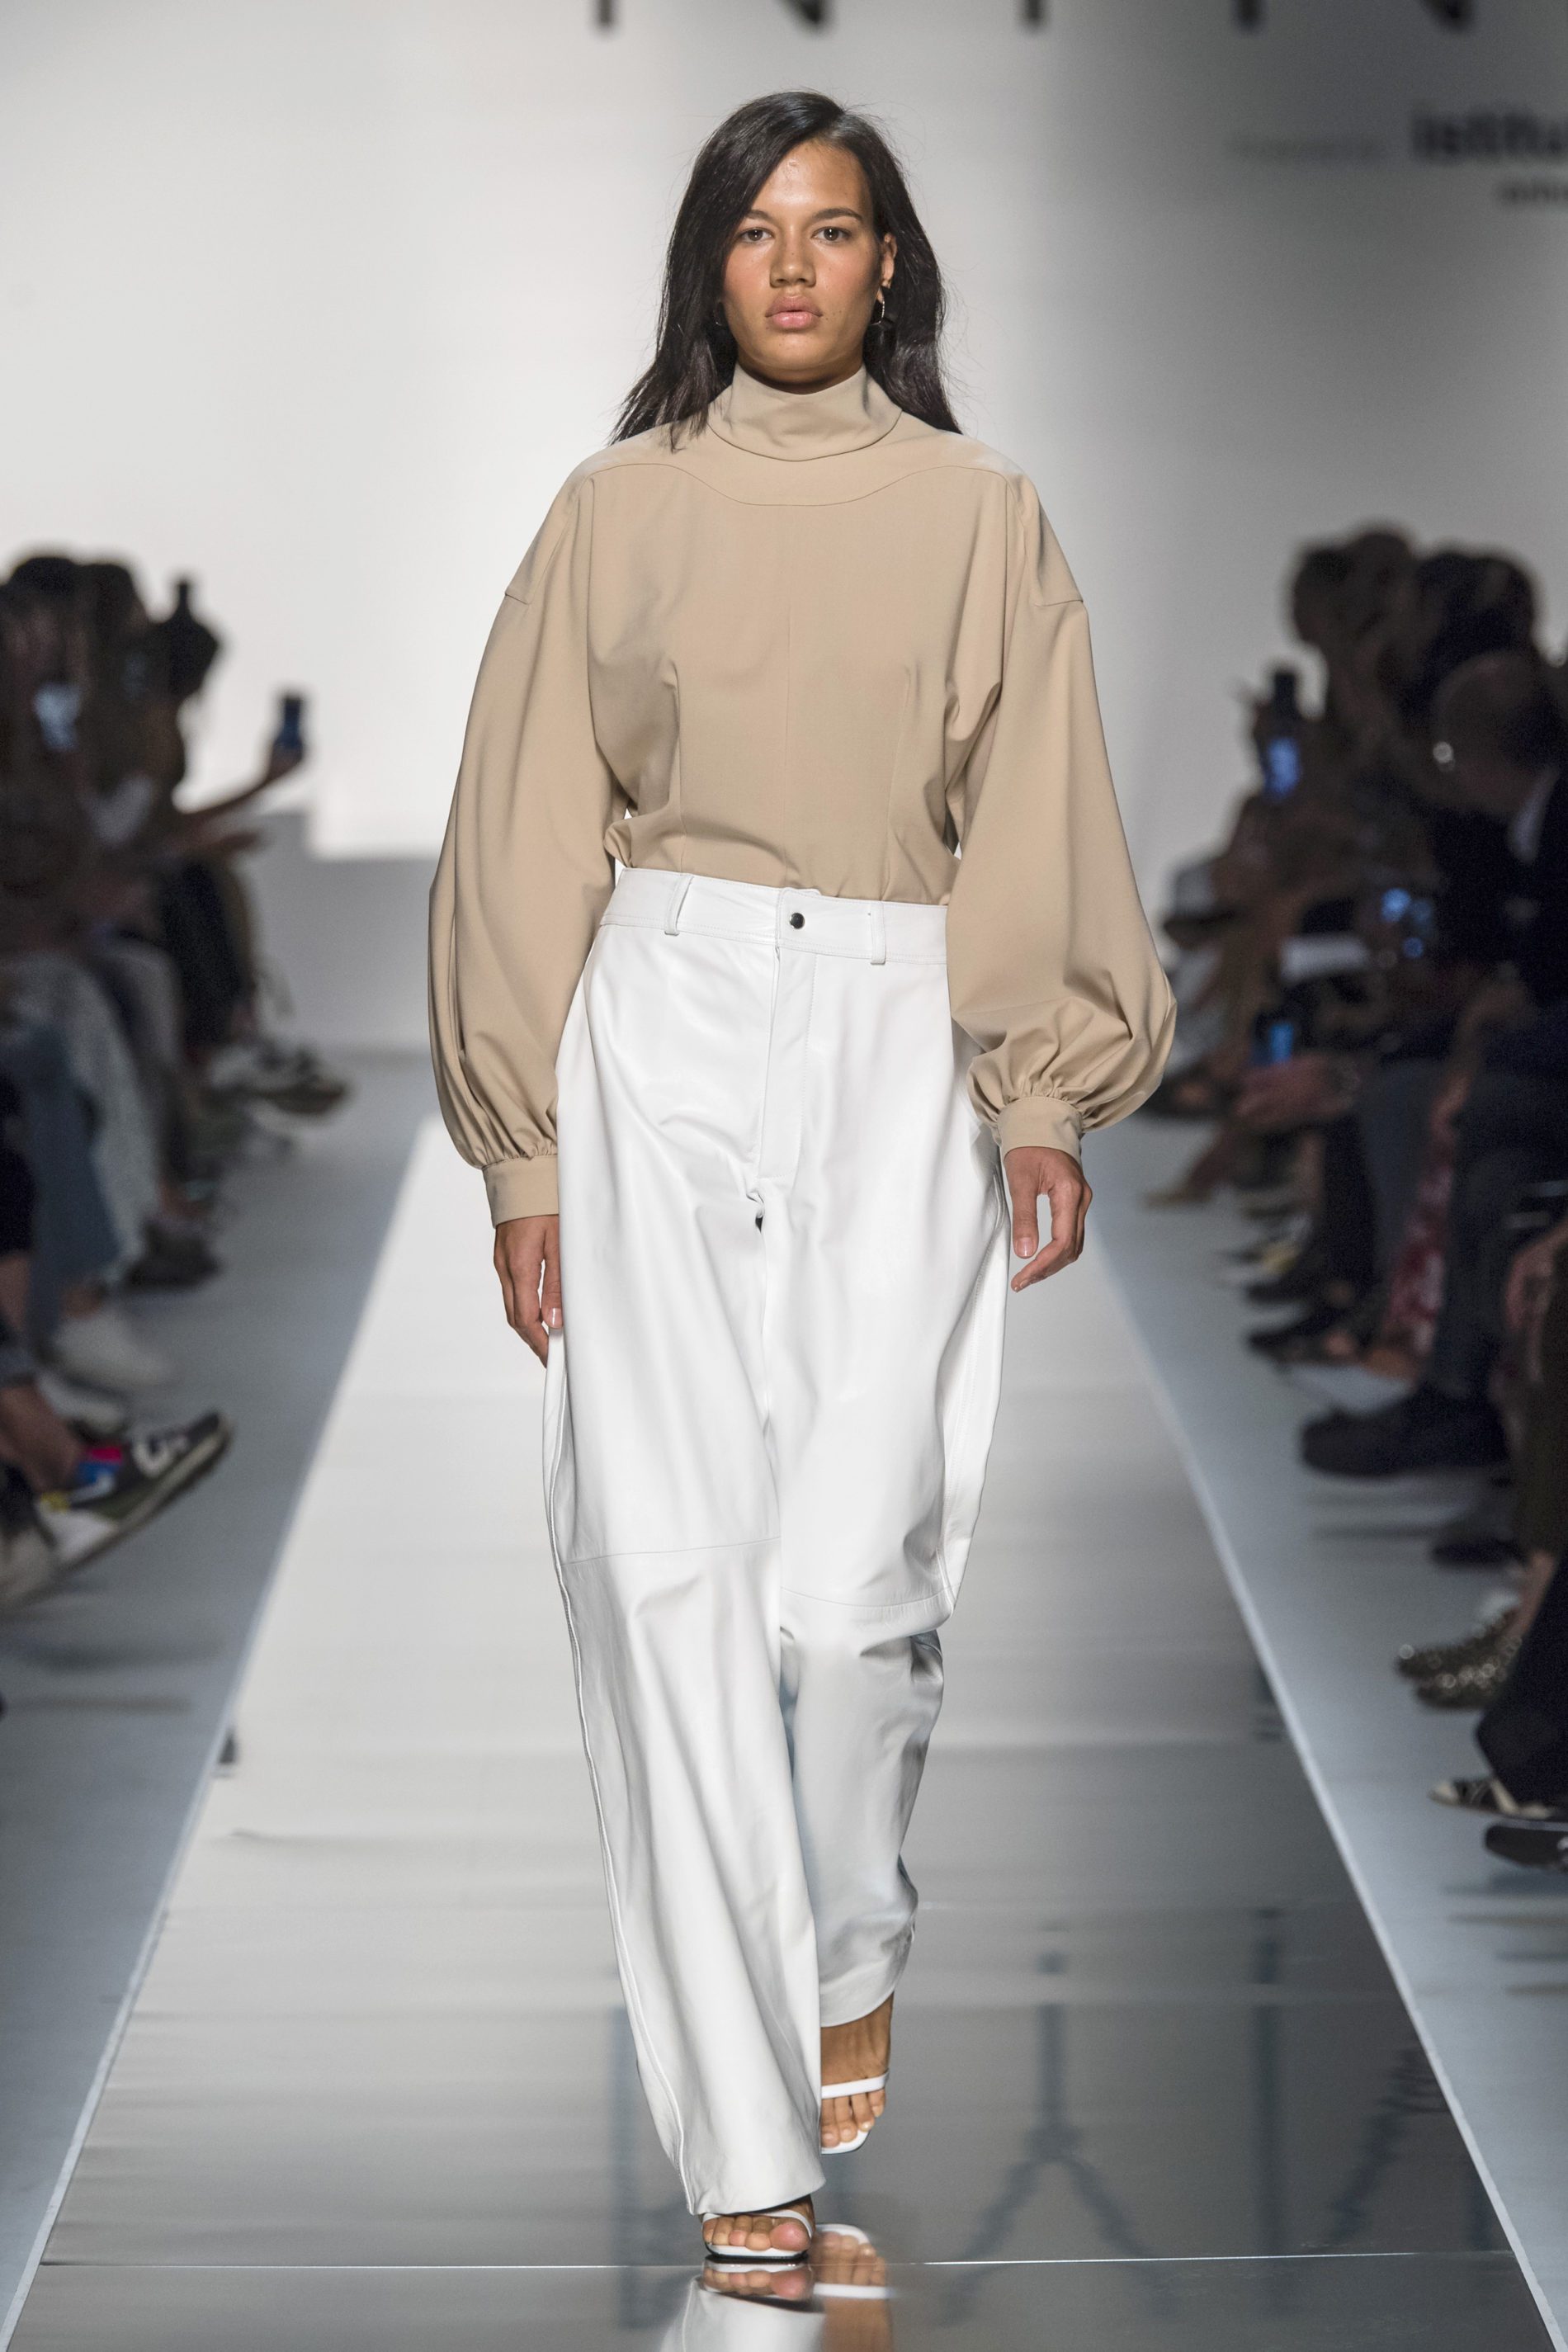 NYNNE SS20 Collection - The Garnette Report